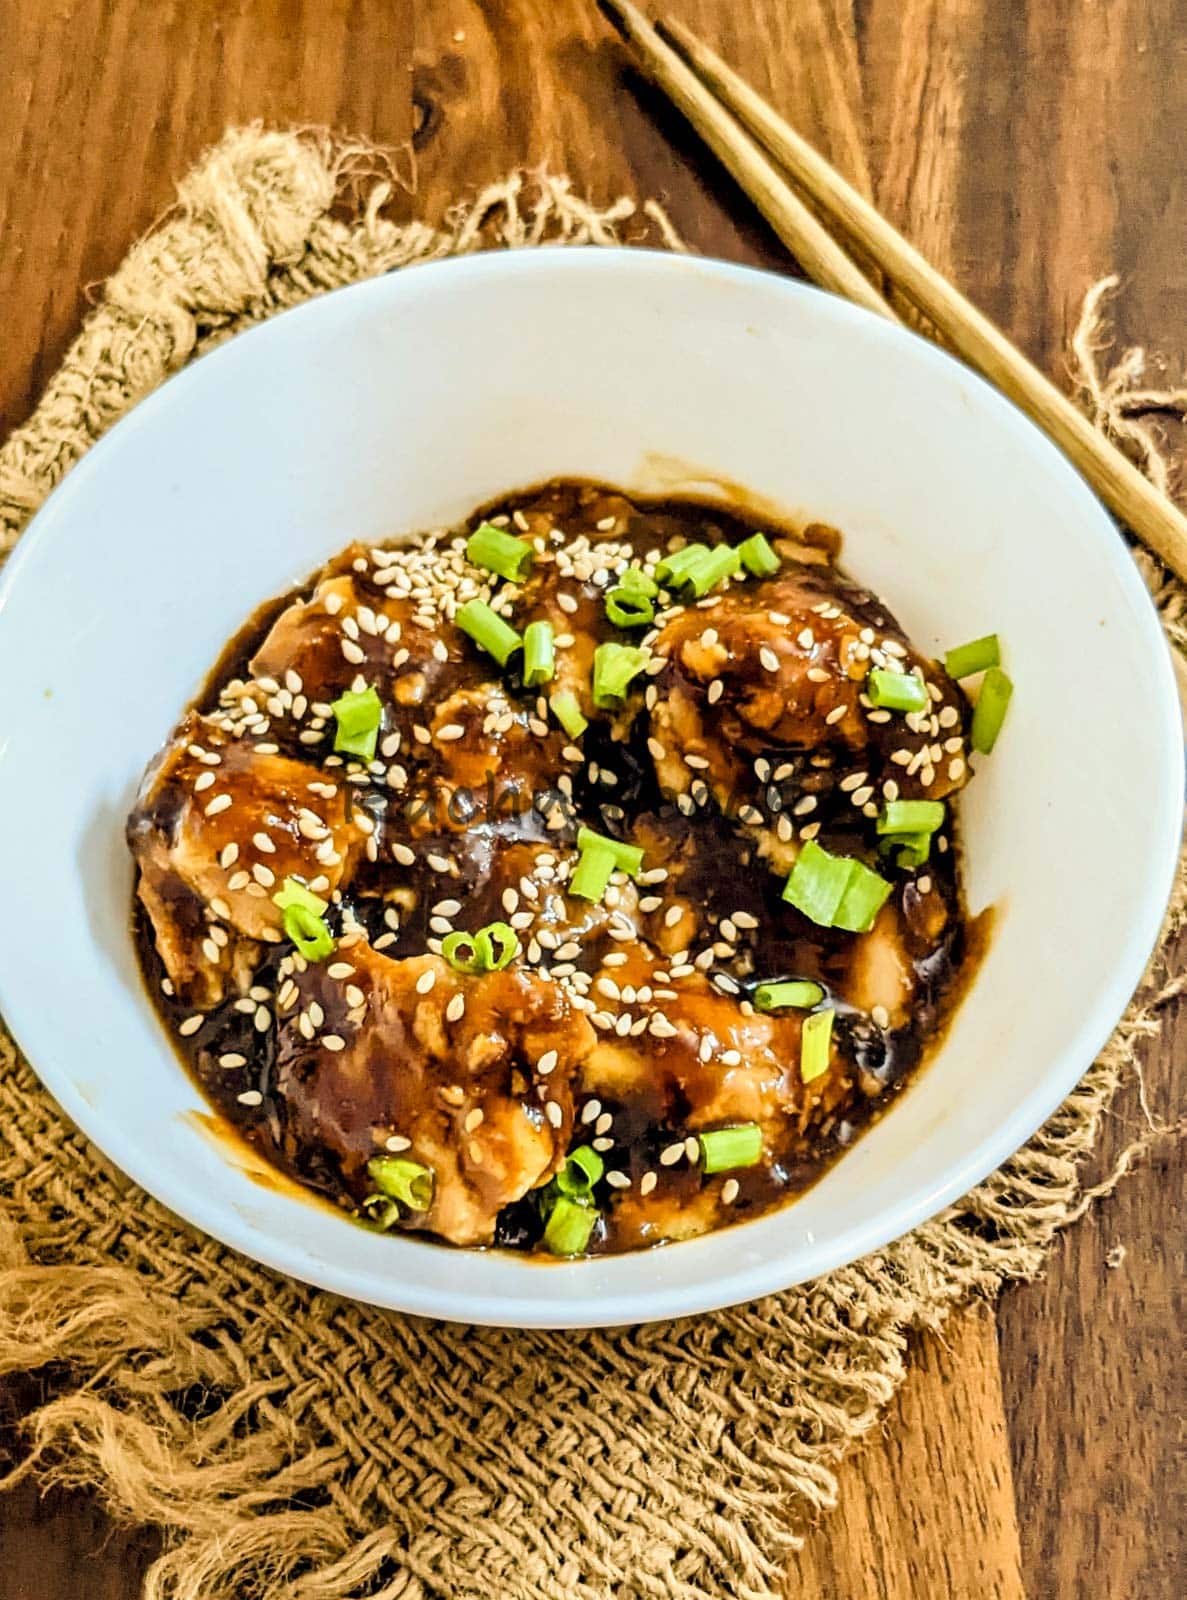 orange chicken garnished with scallions and sesame seeds and served in a bowl.